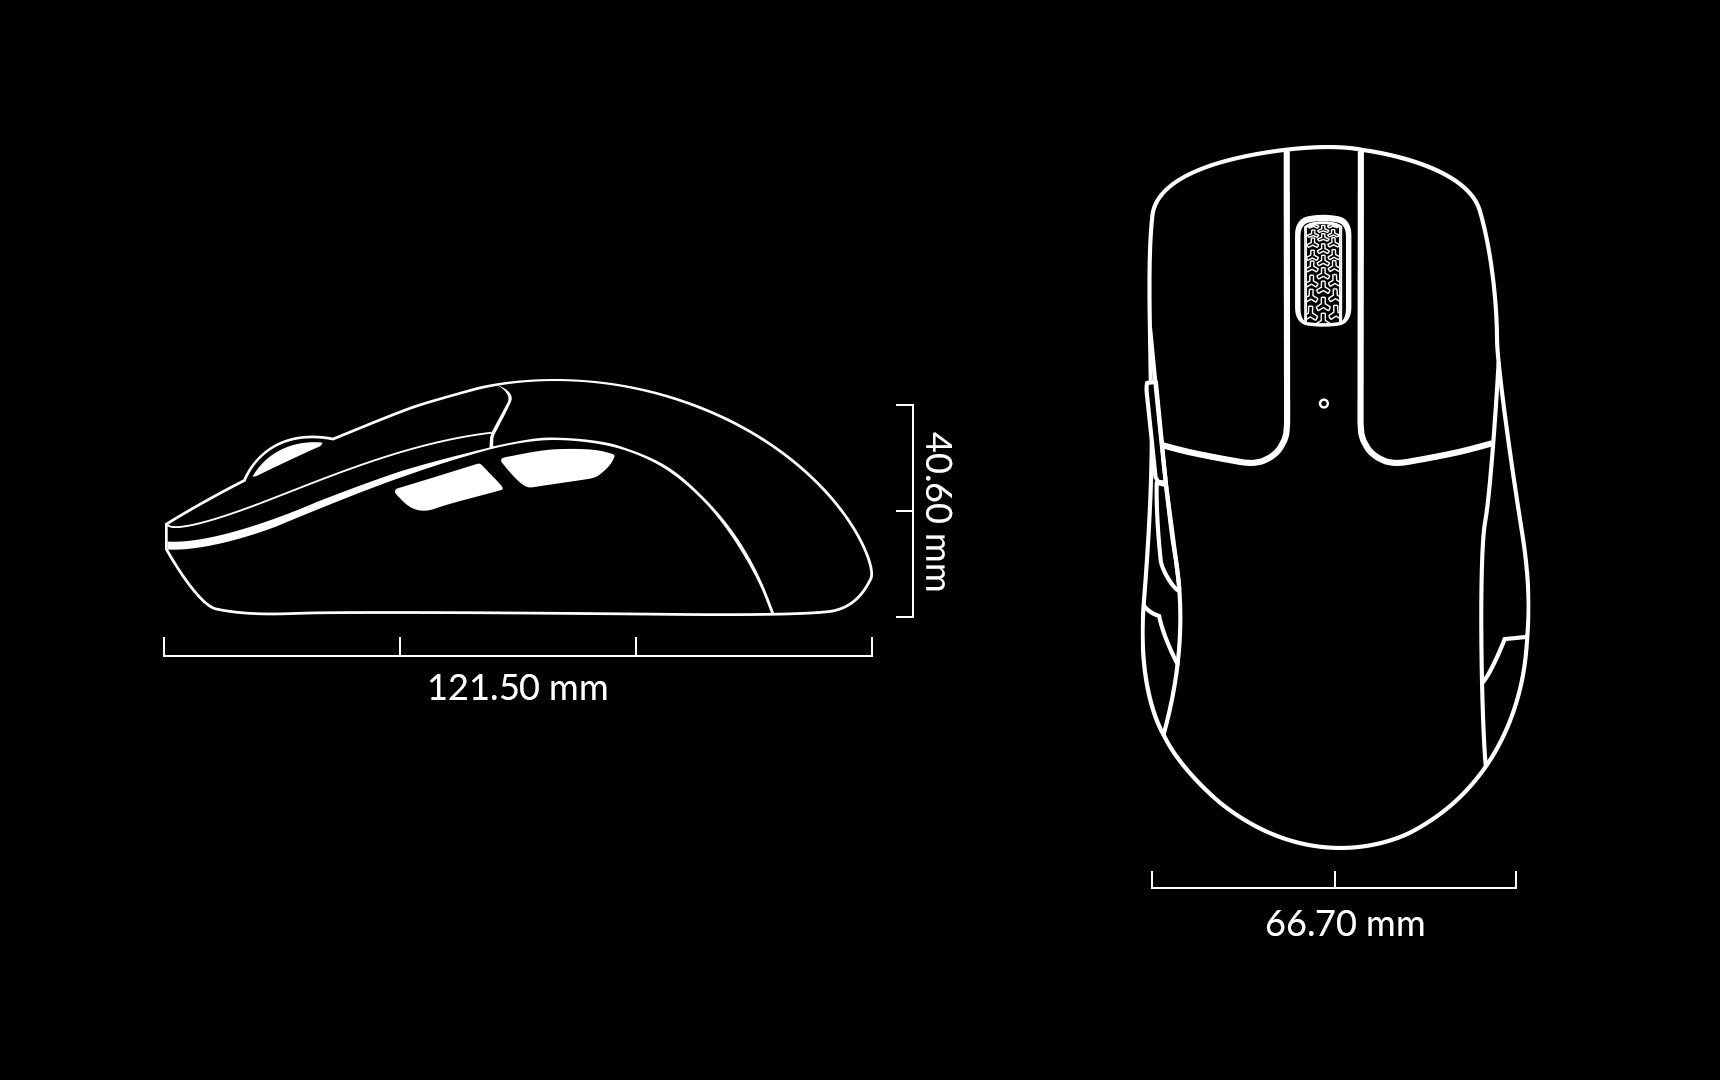 size of the M2 mouse